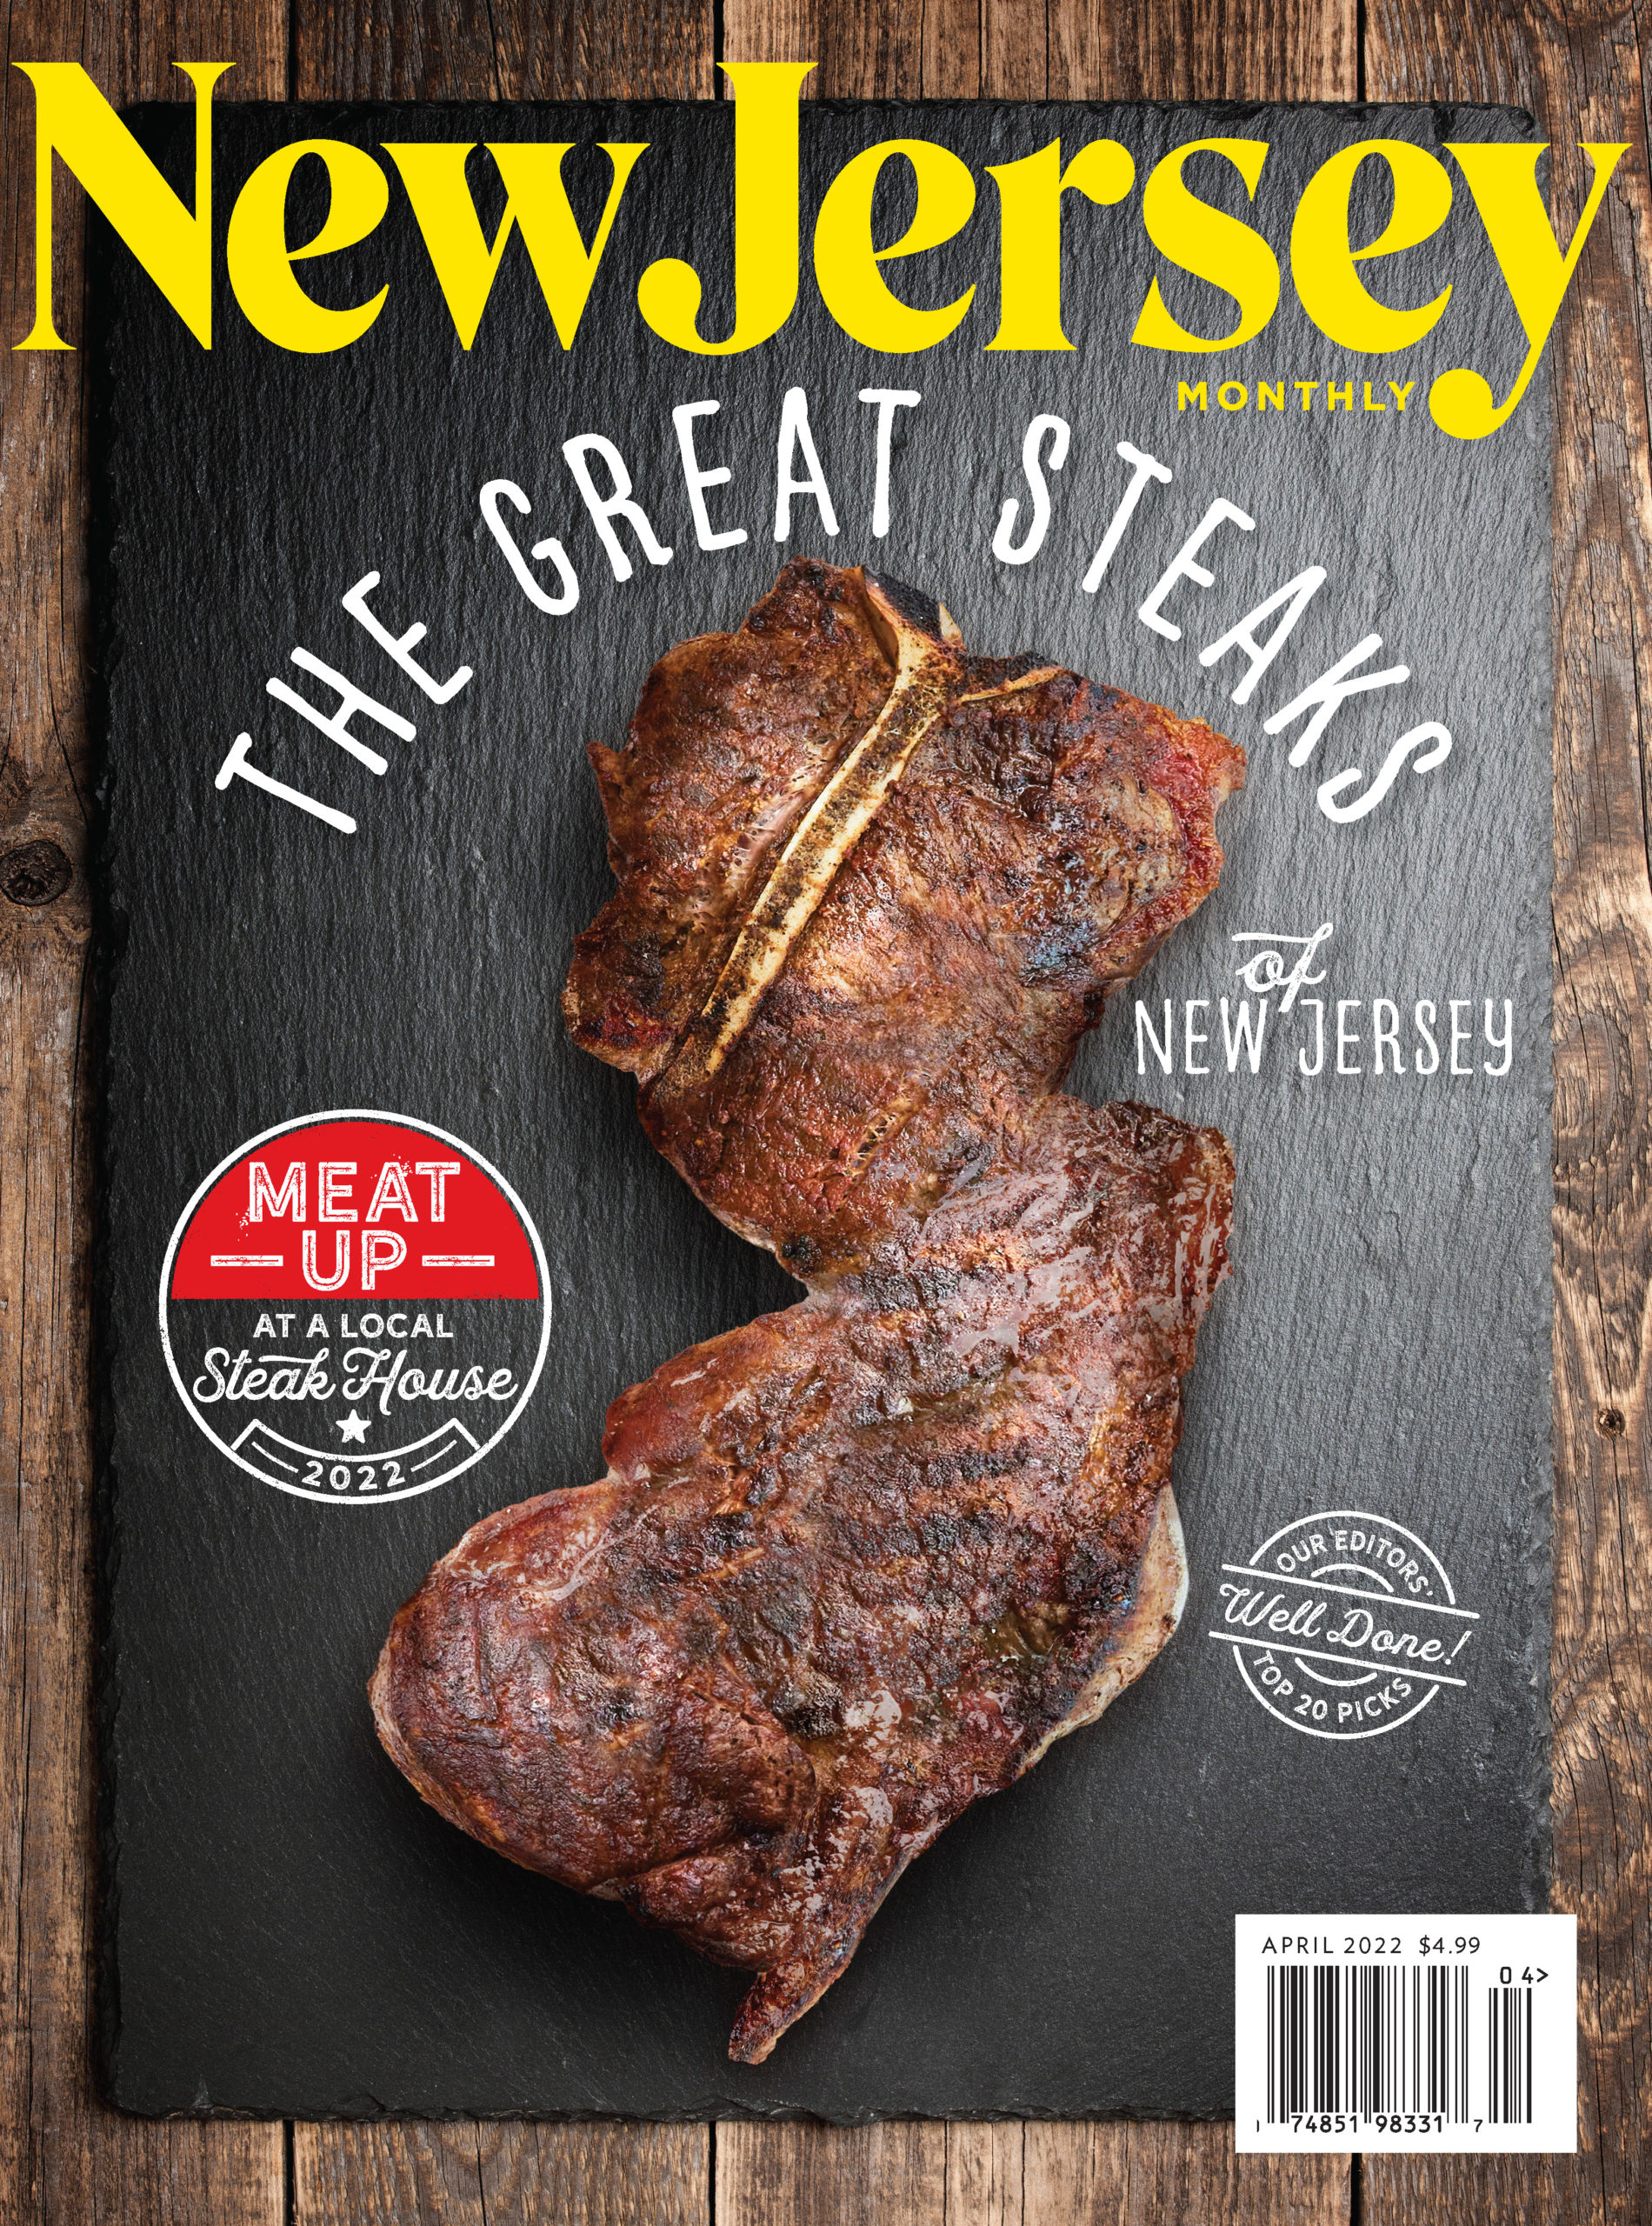 The cover of New Jersey Monthly's April 2022 issue.